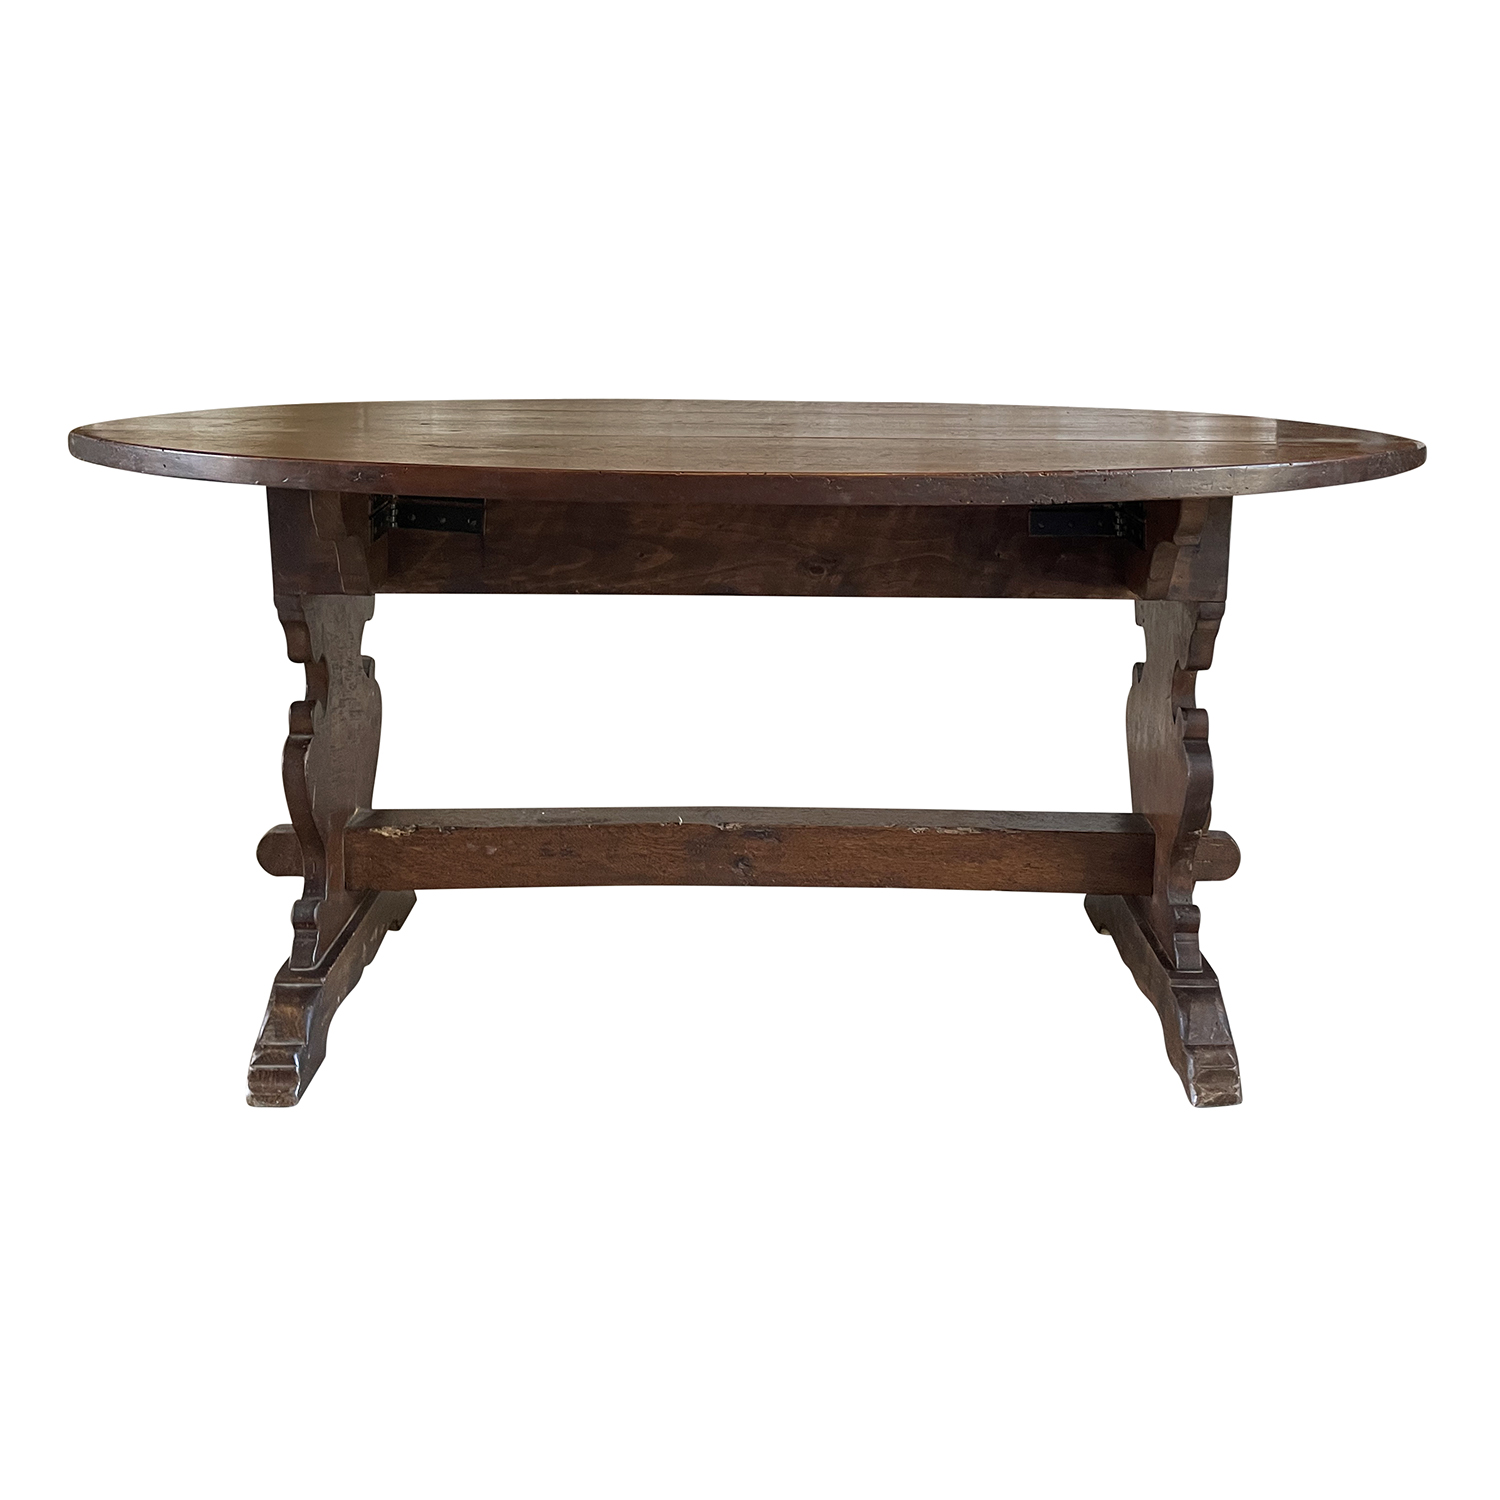 19th Century Italian Antique Oval Drop Leaf Table – Tuscan Dining Room Table